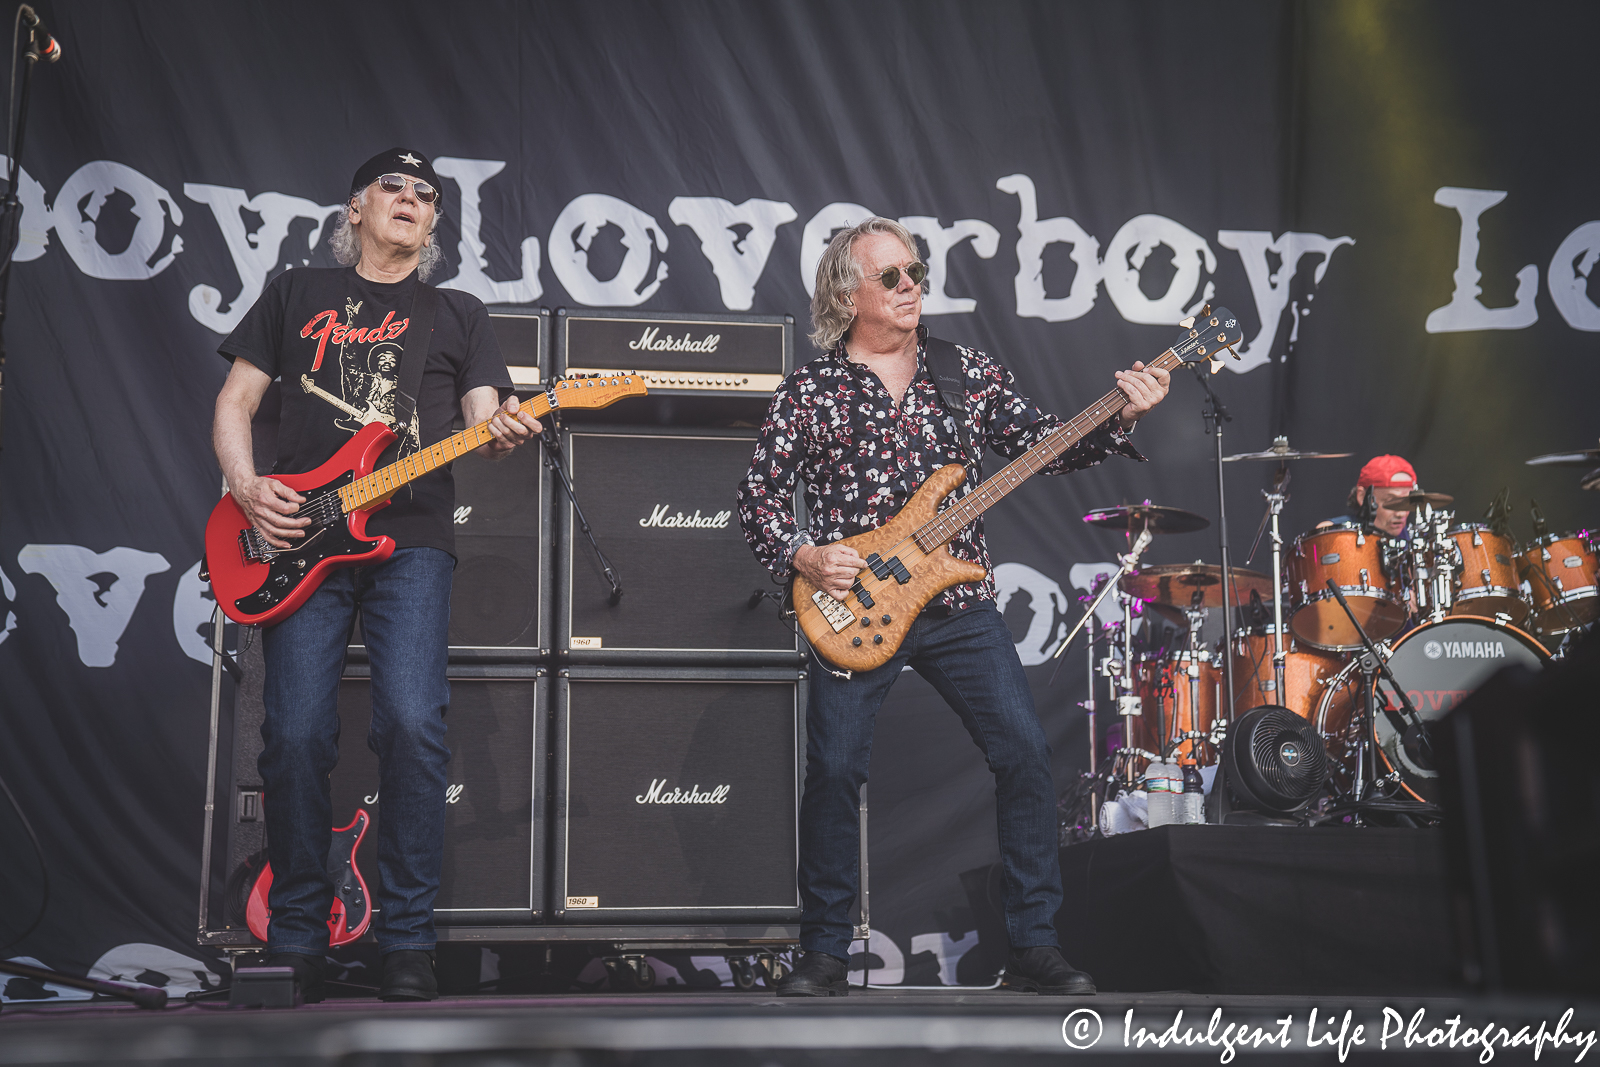 Loverboy band members Paul Dean, Ken "Spider" Sinnaeve and Matt Frenette performing together at Starlight Theatre in Kansas City, MO June 14, 2022.